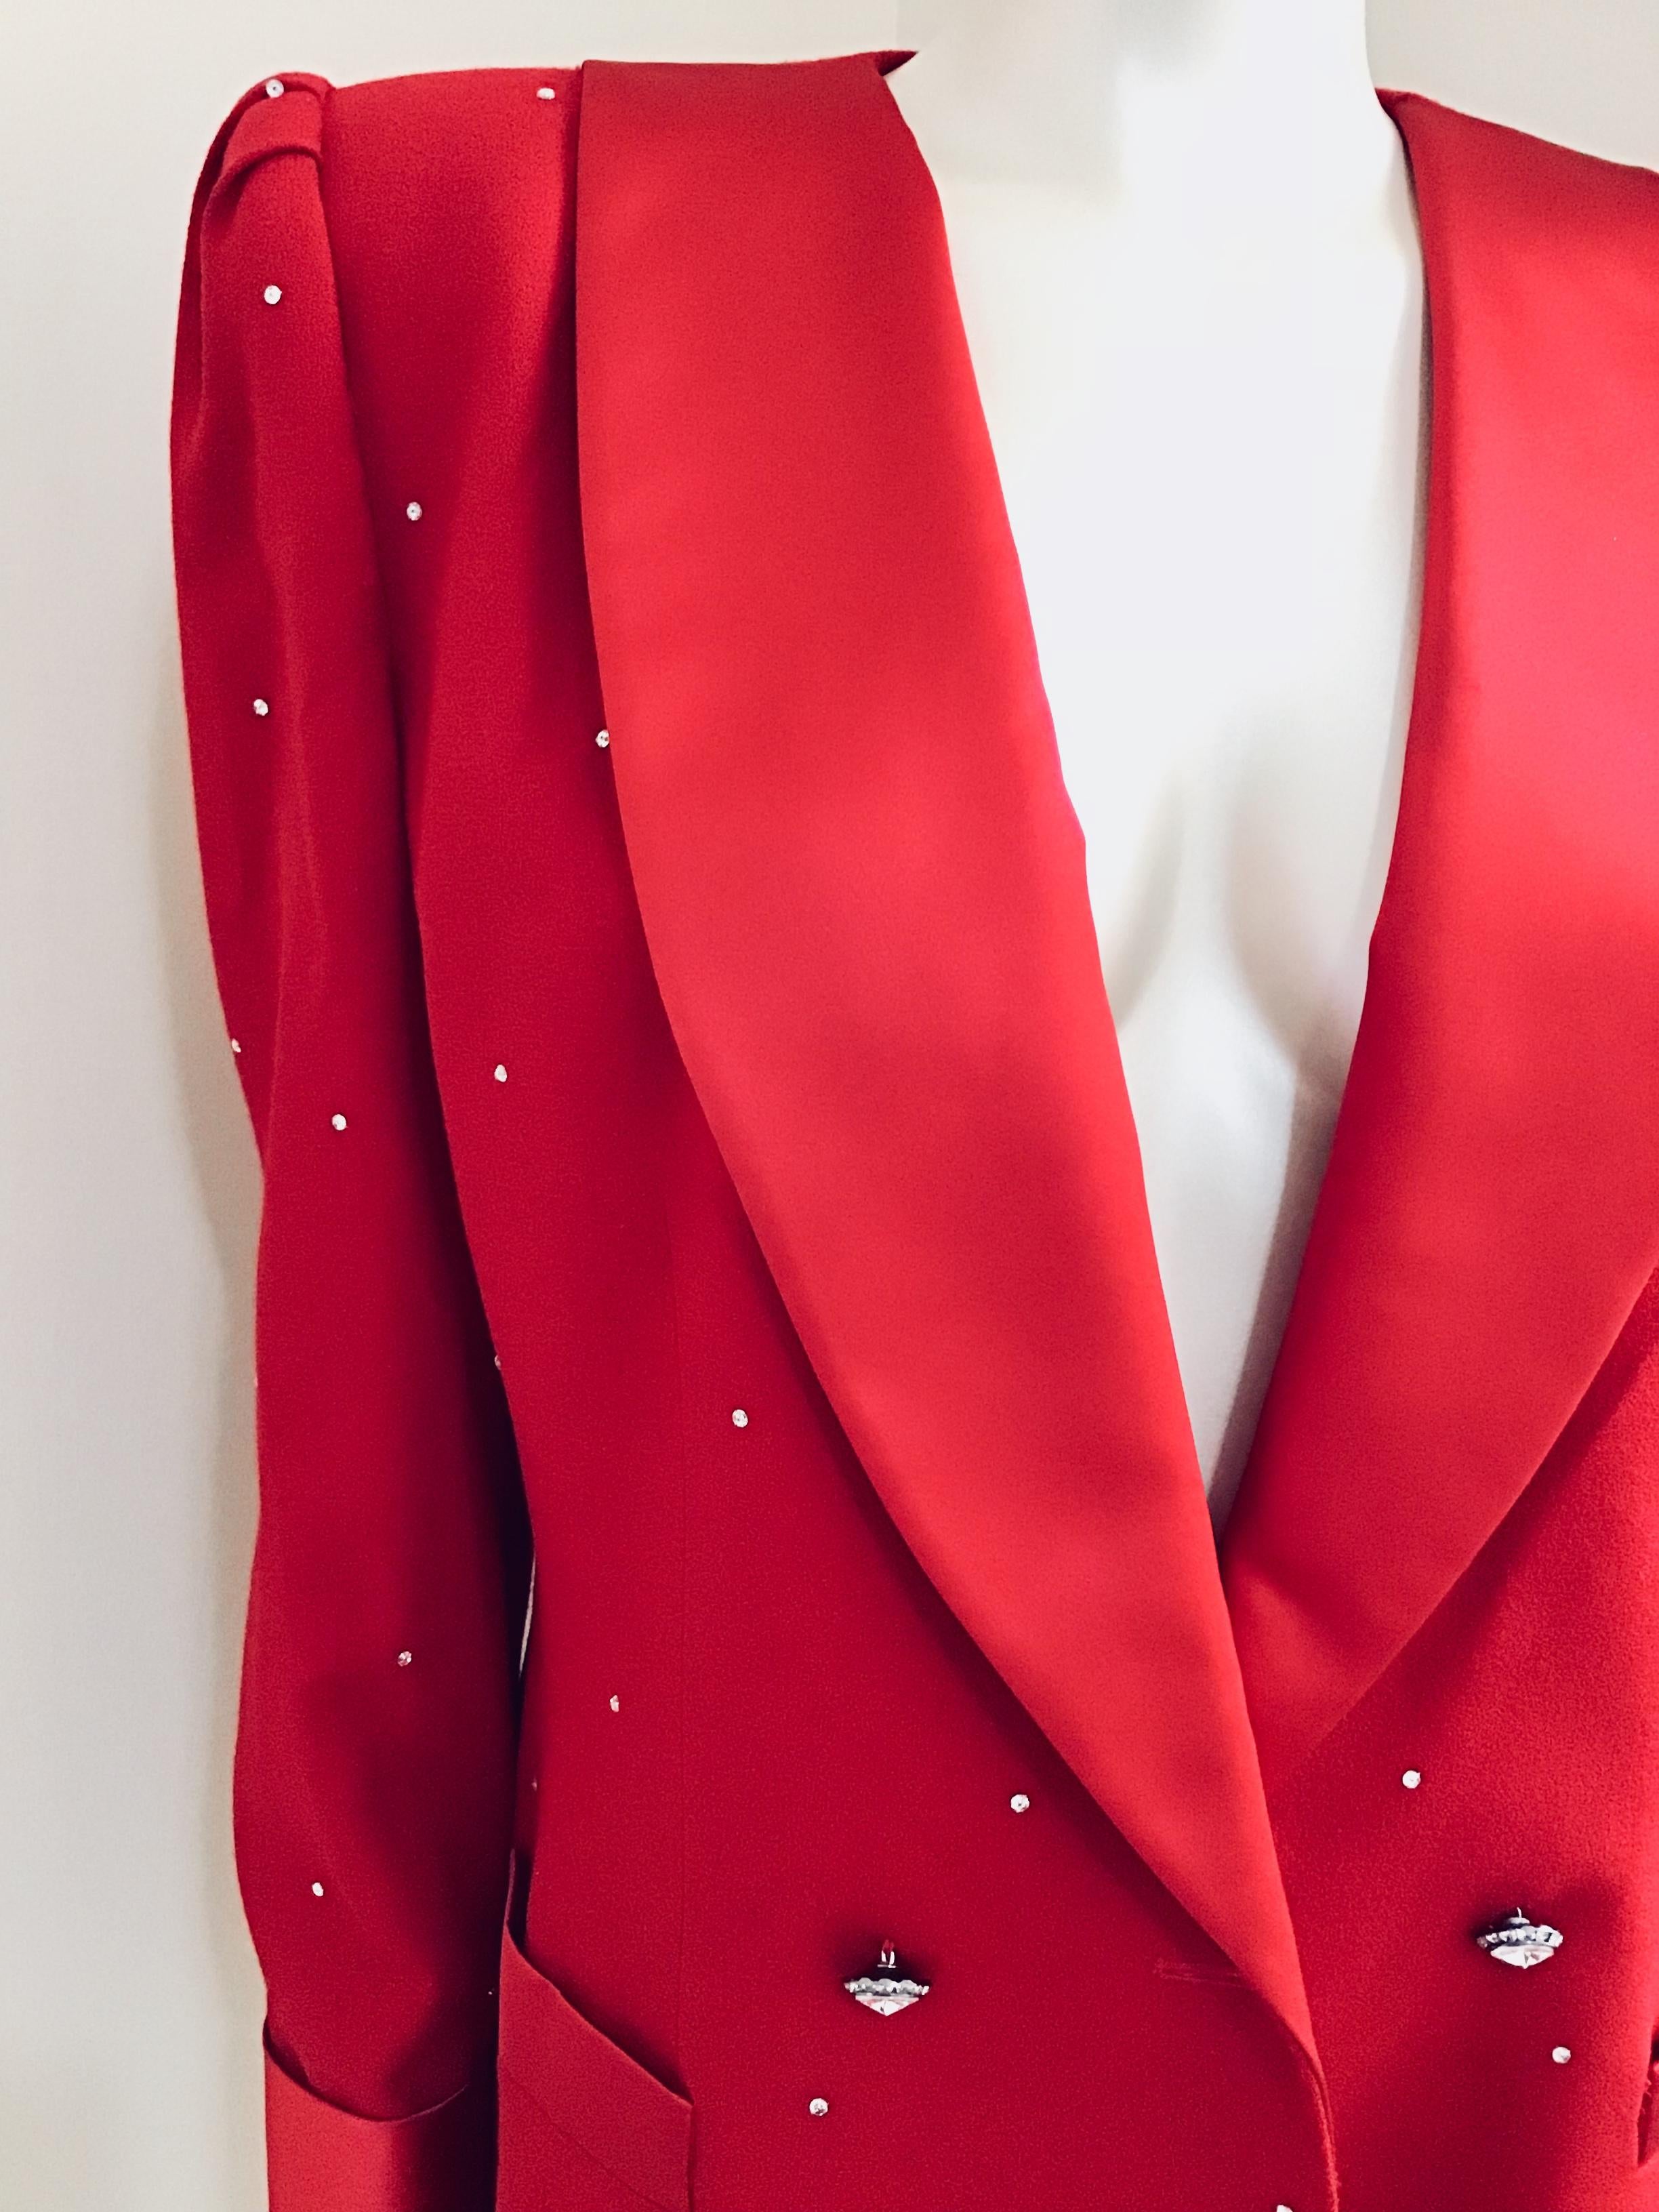 The perfect color red with accents of satin combined with crystal buttons creates the perfect late night blazer. It can easily be worn with dark denim skinny jeans and red bottoms or a satin pencil pant. Either look and you are sure to stand out!